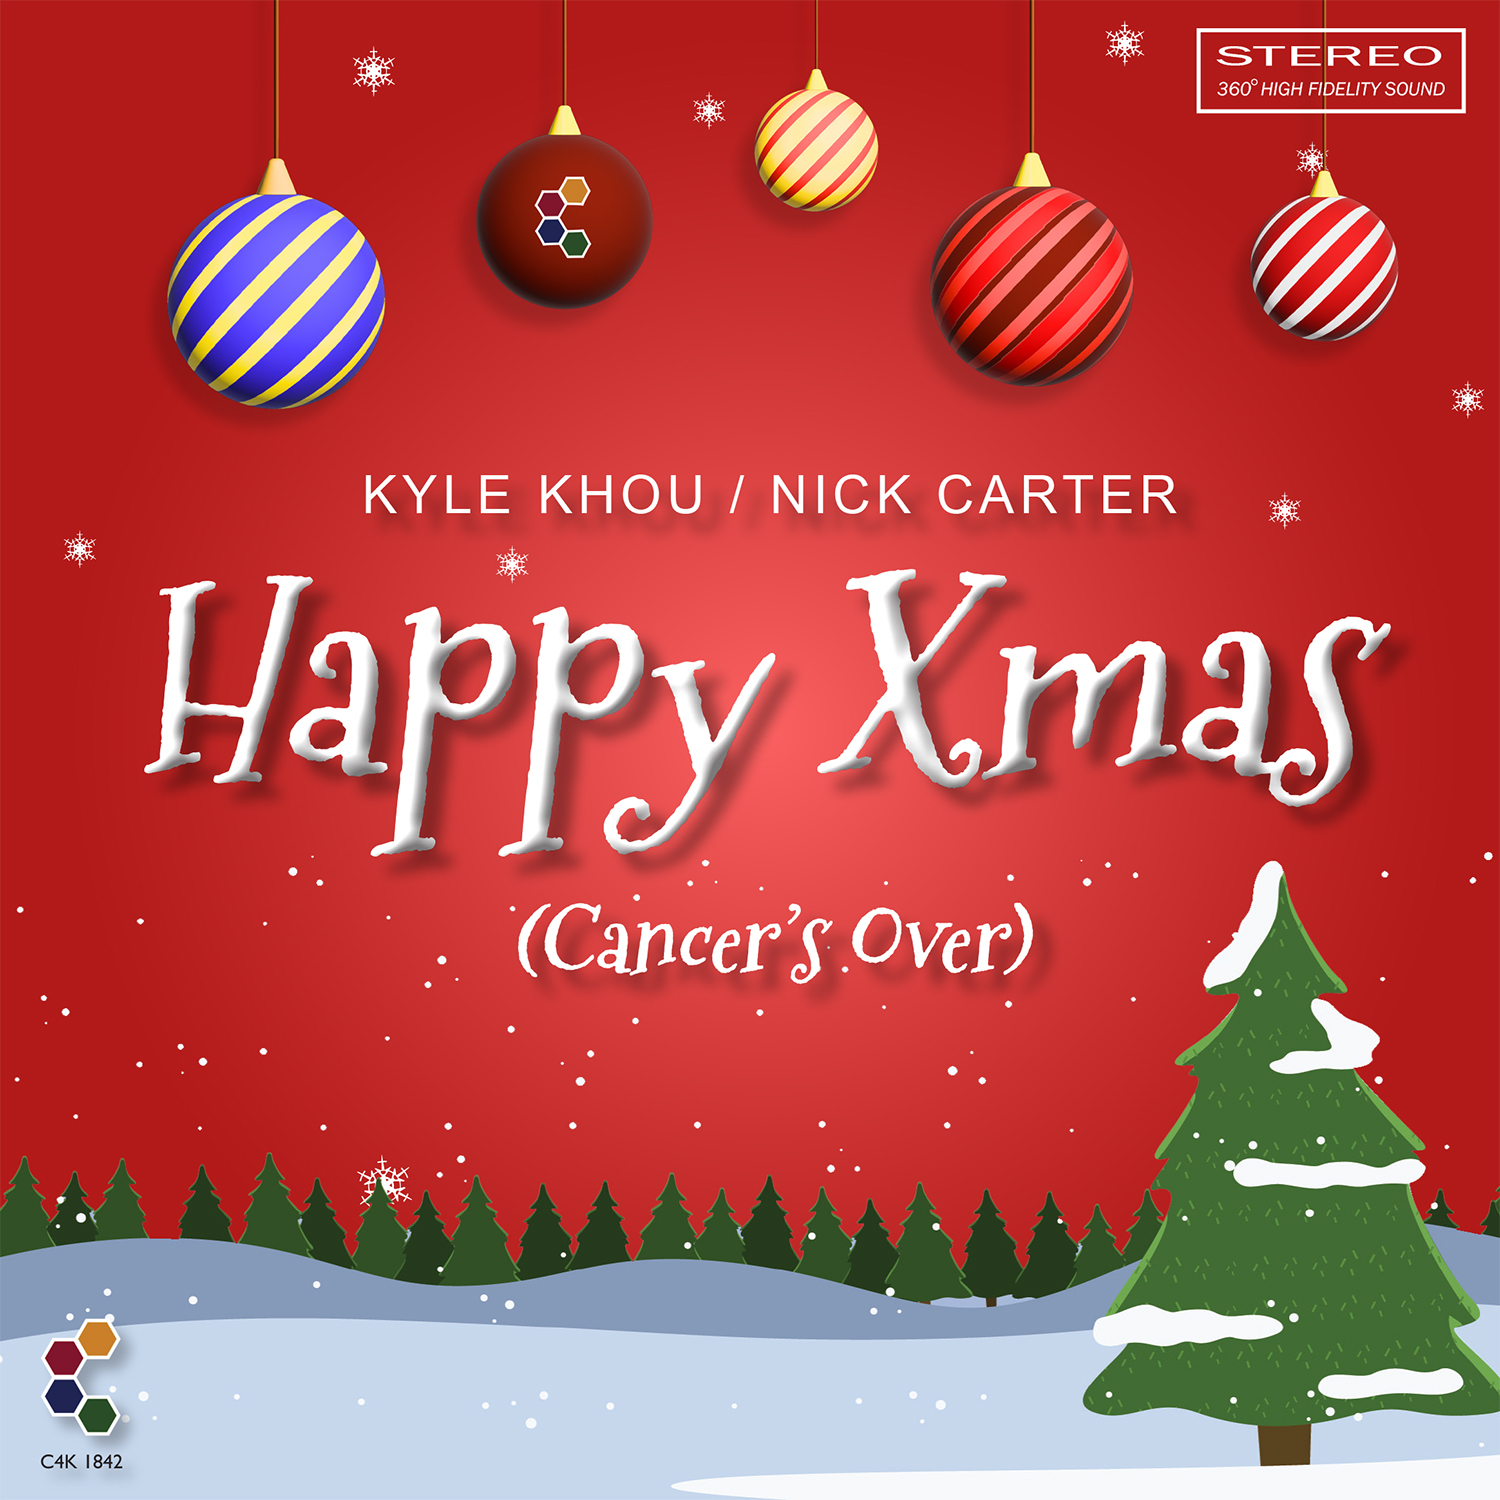 'Happy Xmas' - (Cancer's Over) - Nick Carter and Kyle Khou